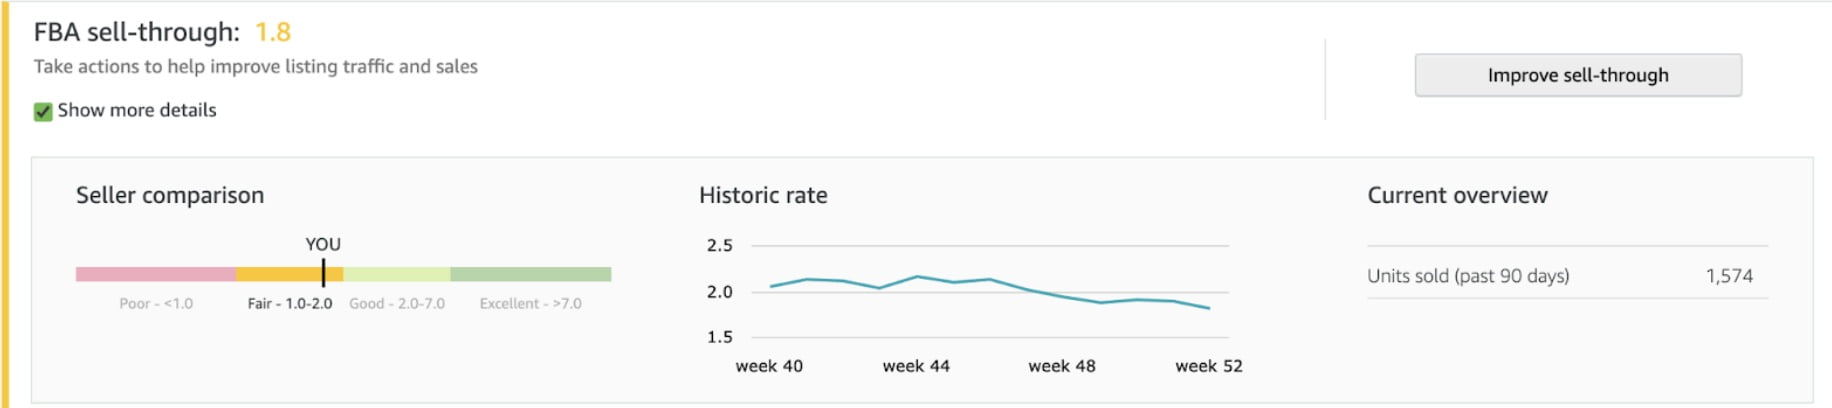 Amazon Sell Through Rate Historical Data